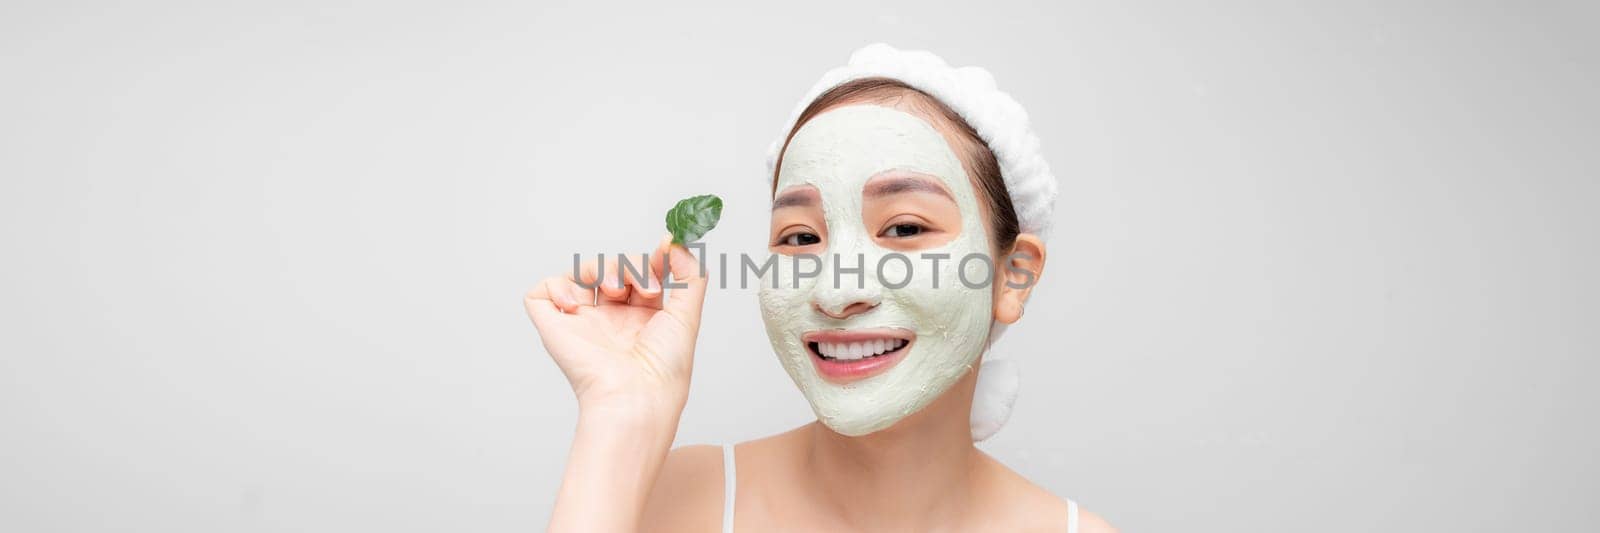 Minimal beauty portrait woman applying white nourishing mask or creme on face, green leaf in hand. banner by makidotvn